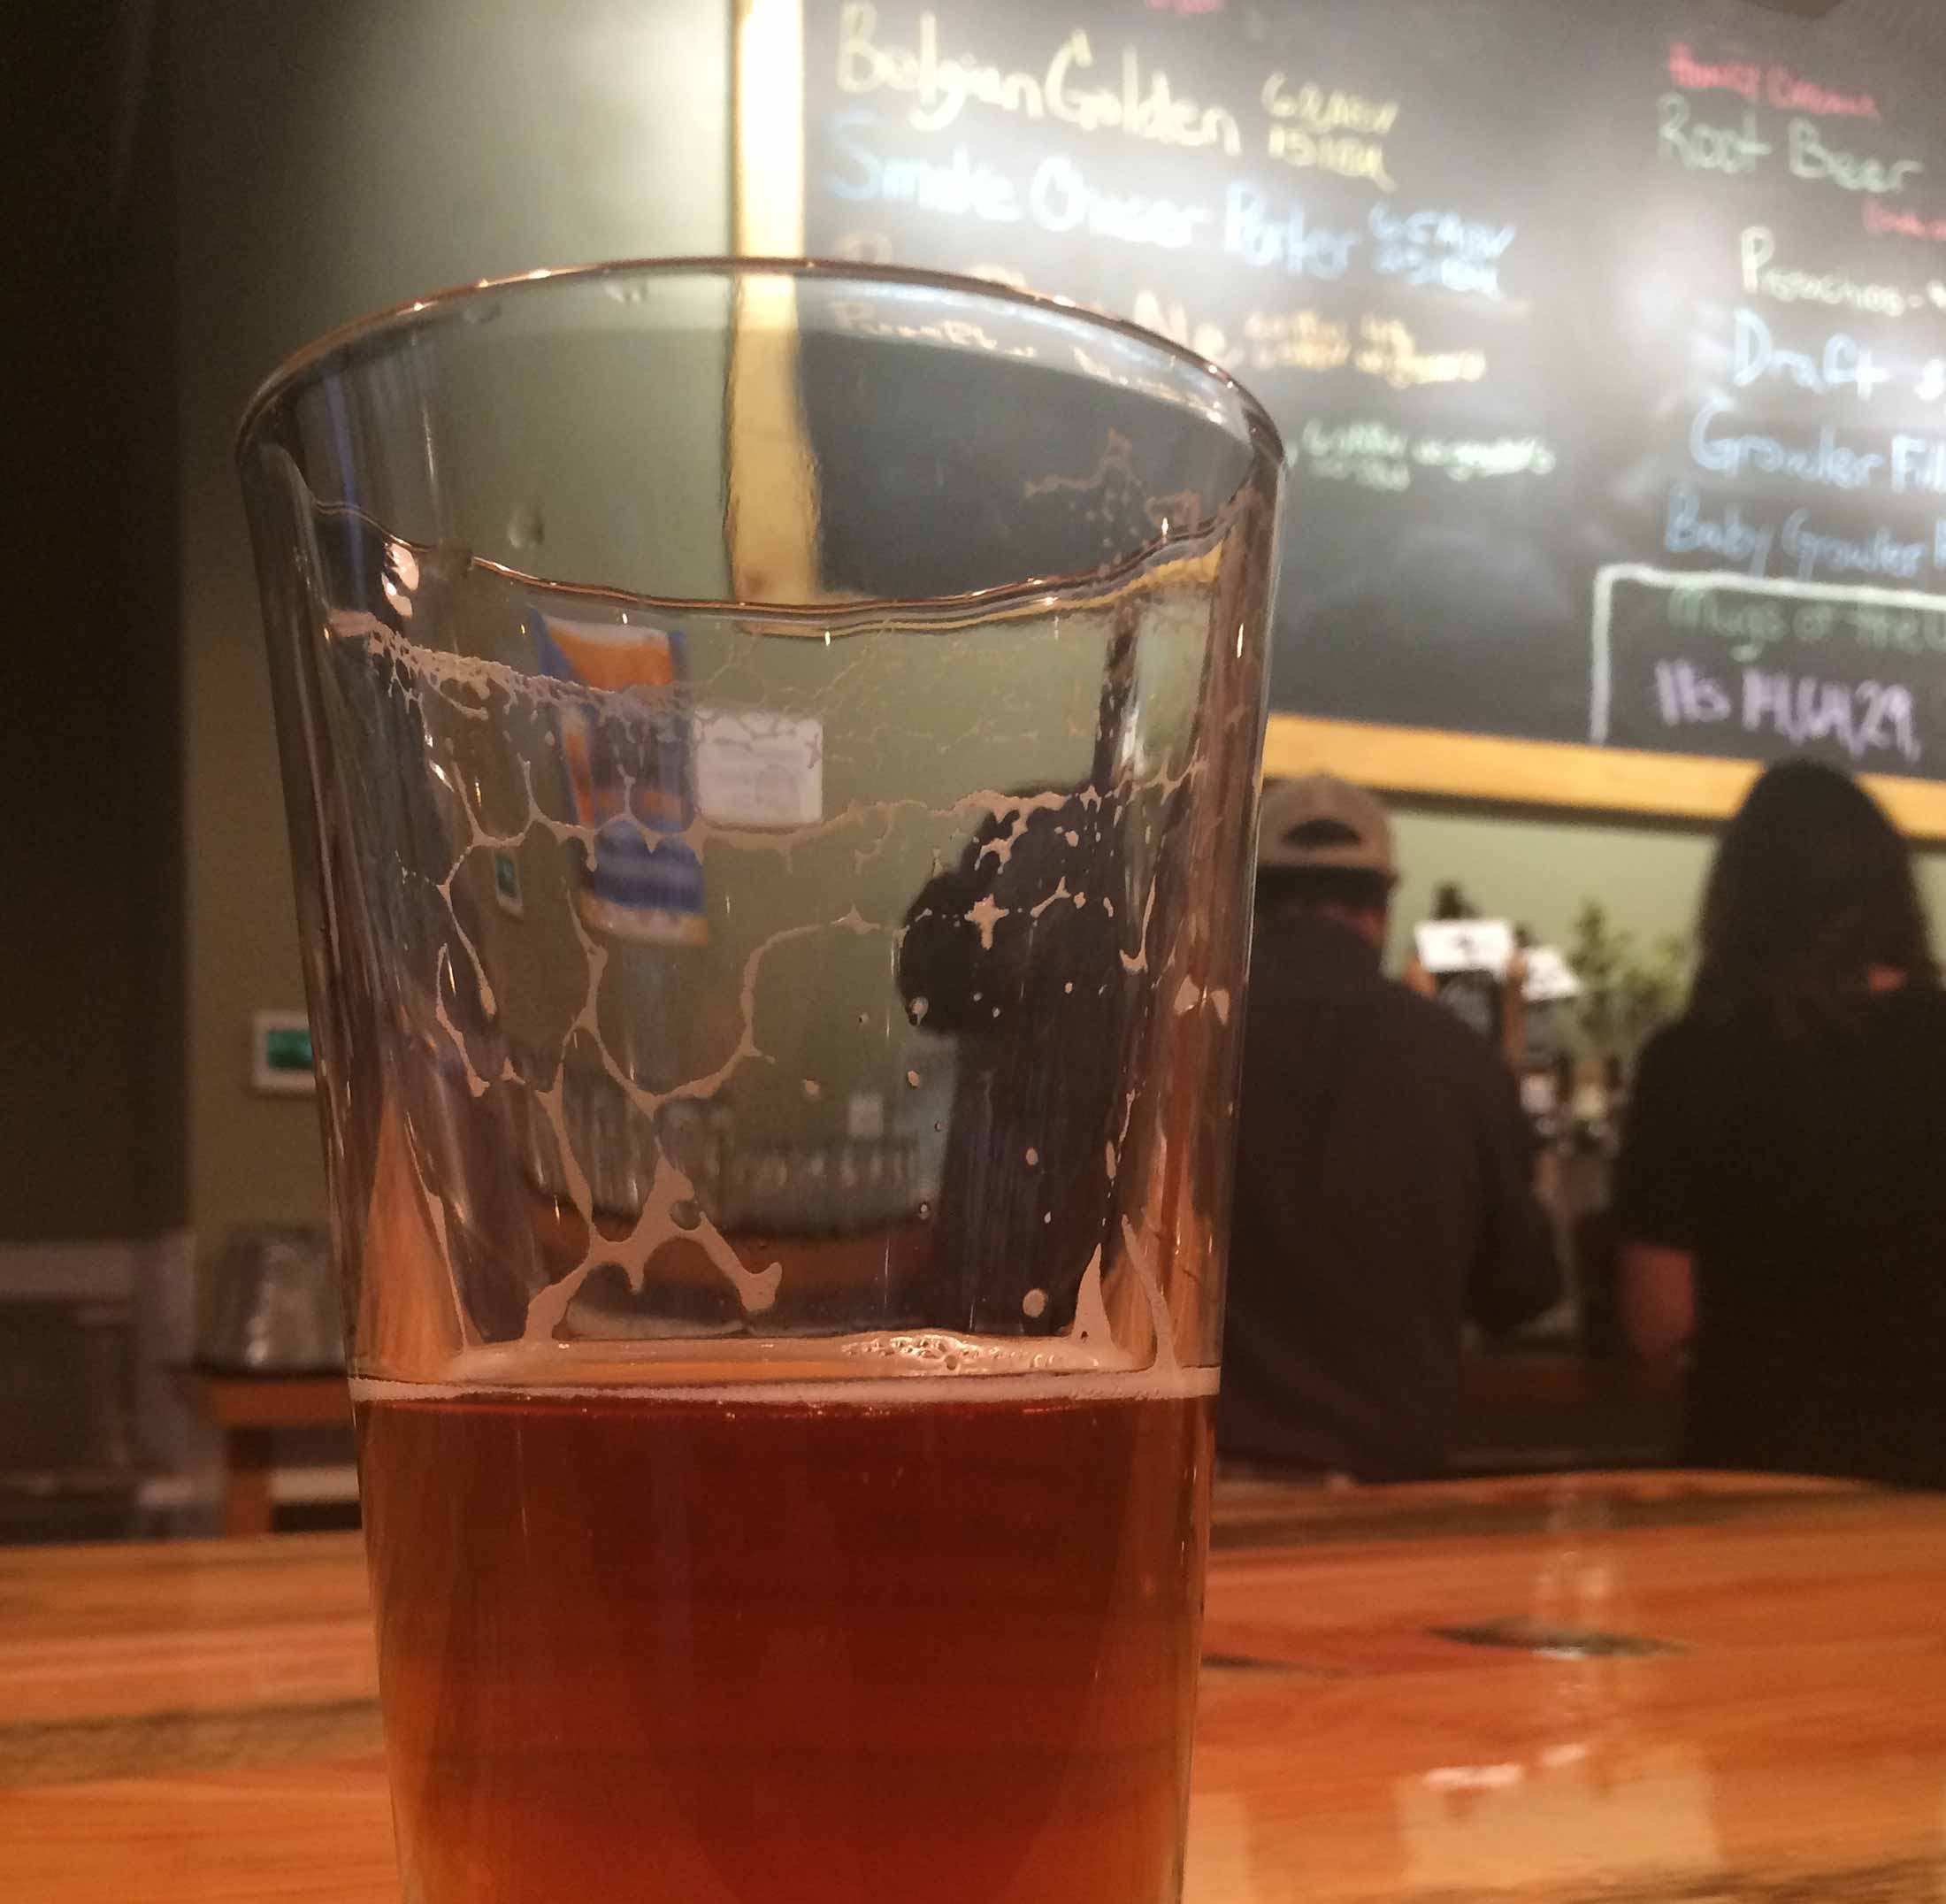 Great Burn Brewing, Missoula's newest brewery in 2014